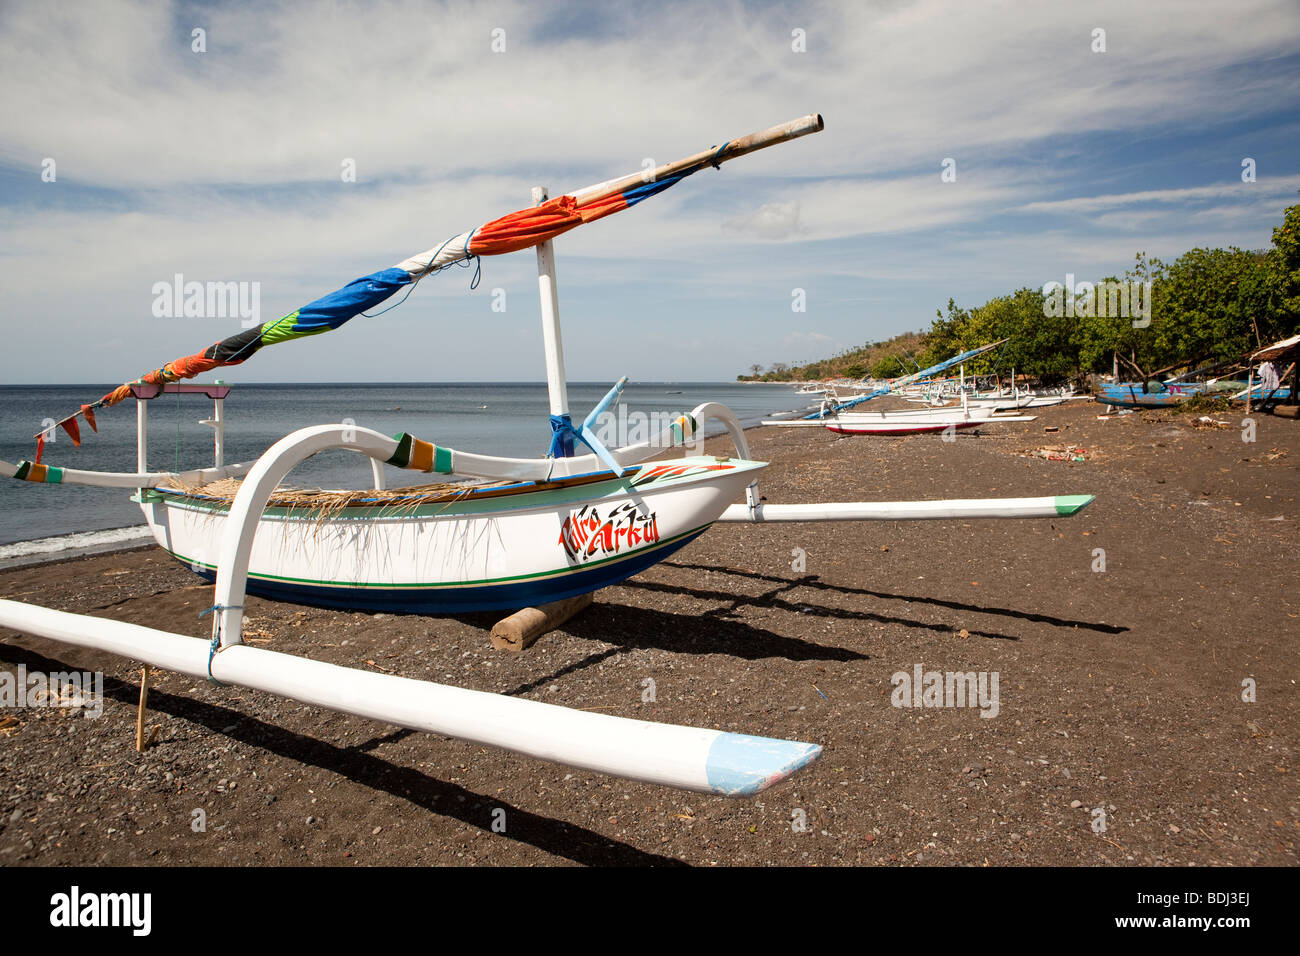 Indonesia, Bali, Amed, colourfully painted outrigger fishing boats on the black volcanic sand beach Stock Photo